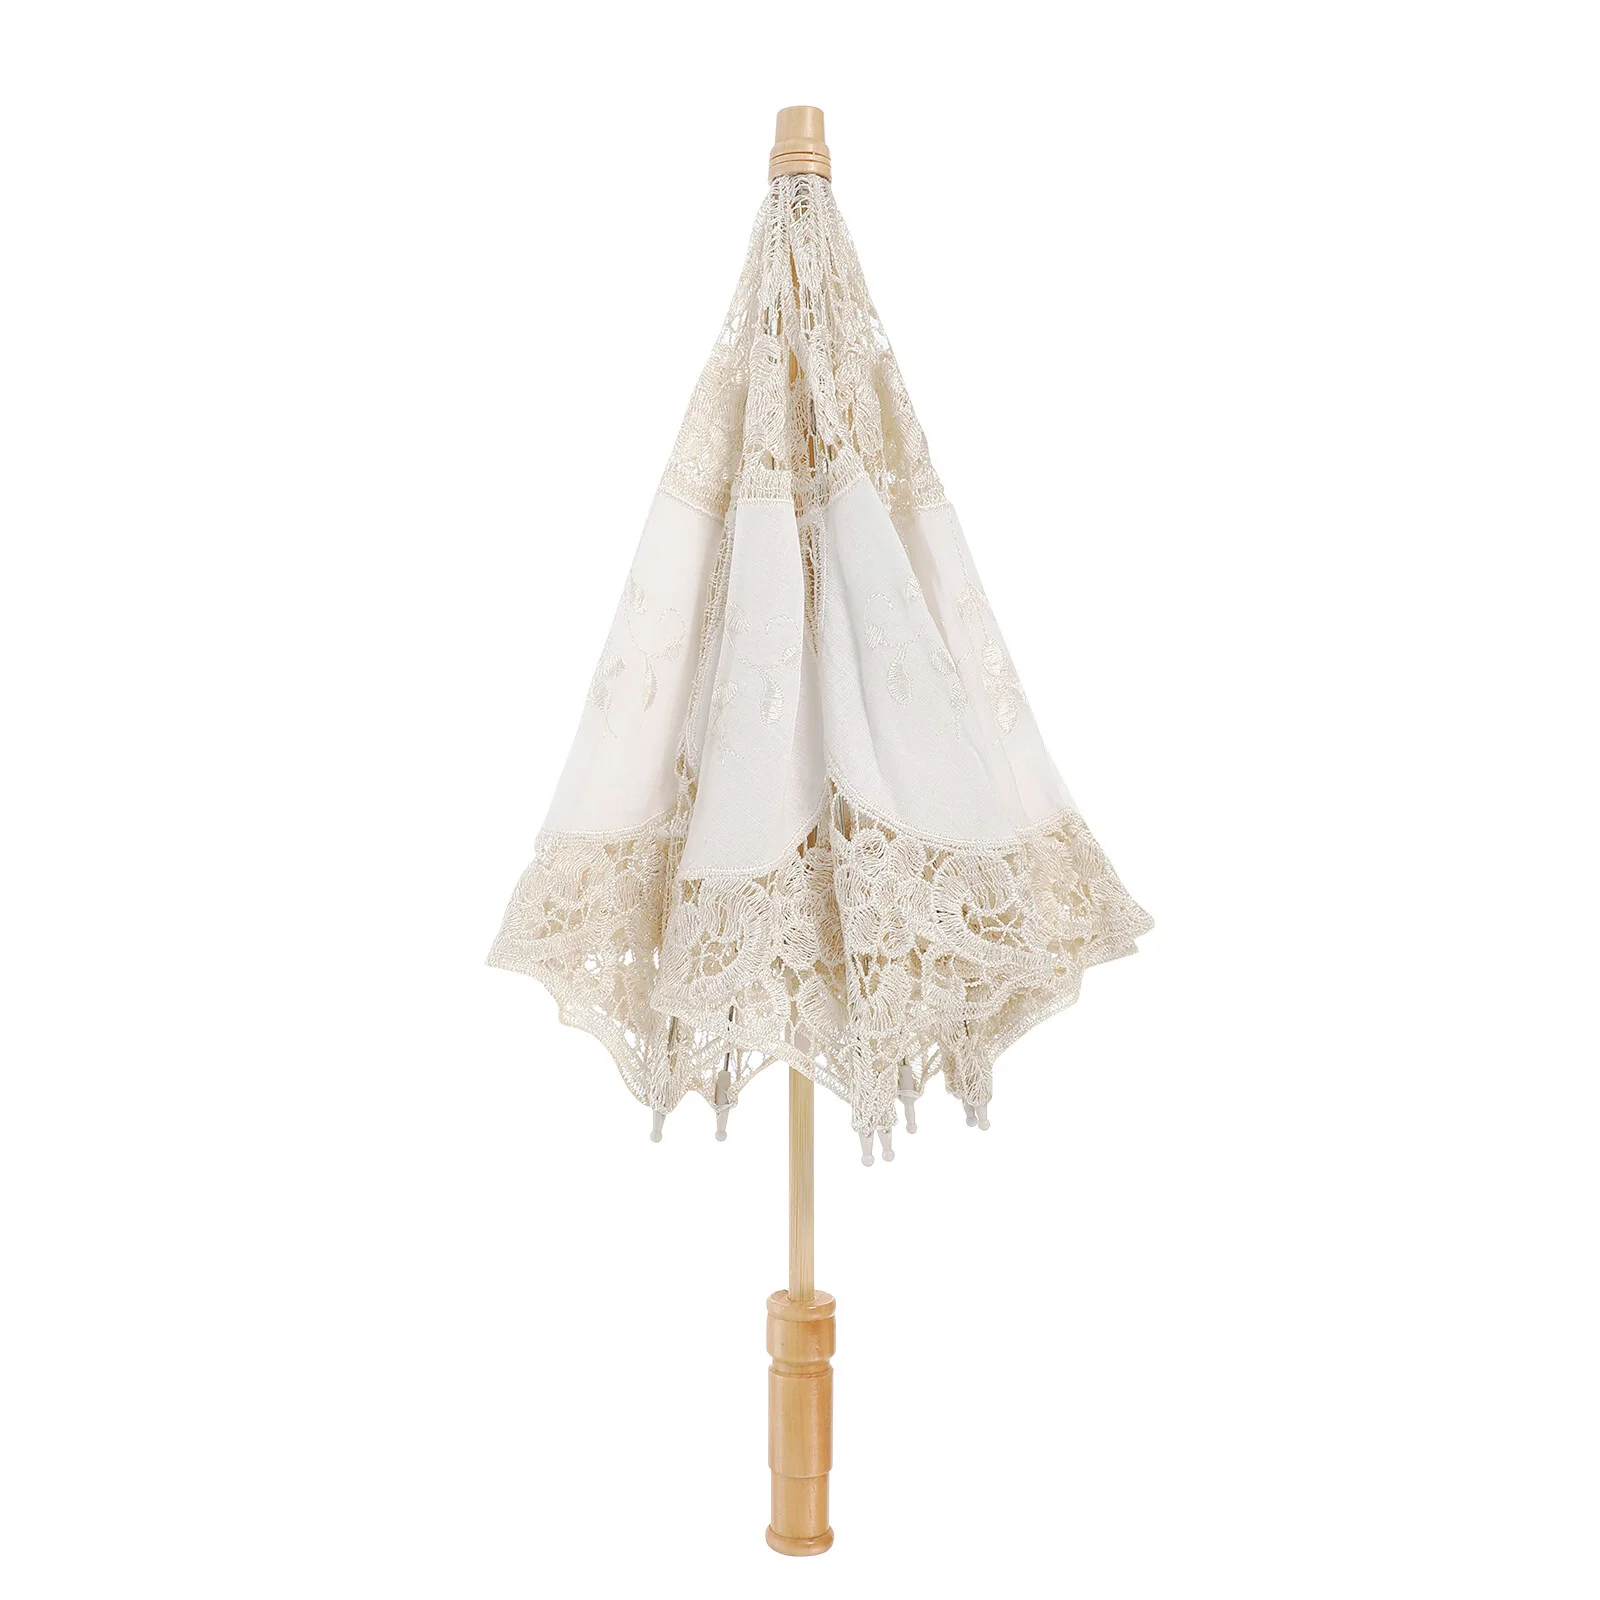 

Wedding Dresses Girls Handheld Umbrella Photo Lace Embroidered Parasol Photography Prop Bamboo Miss Wooden Handle